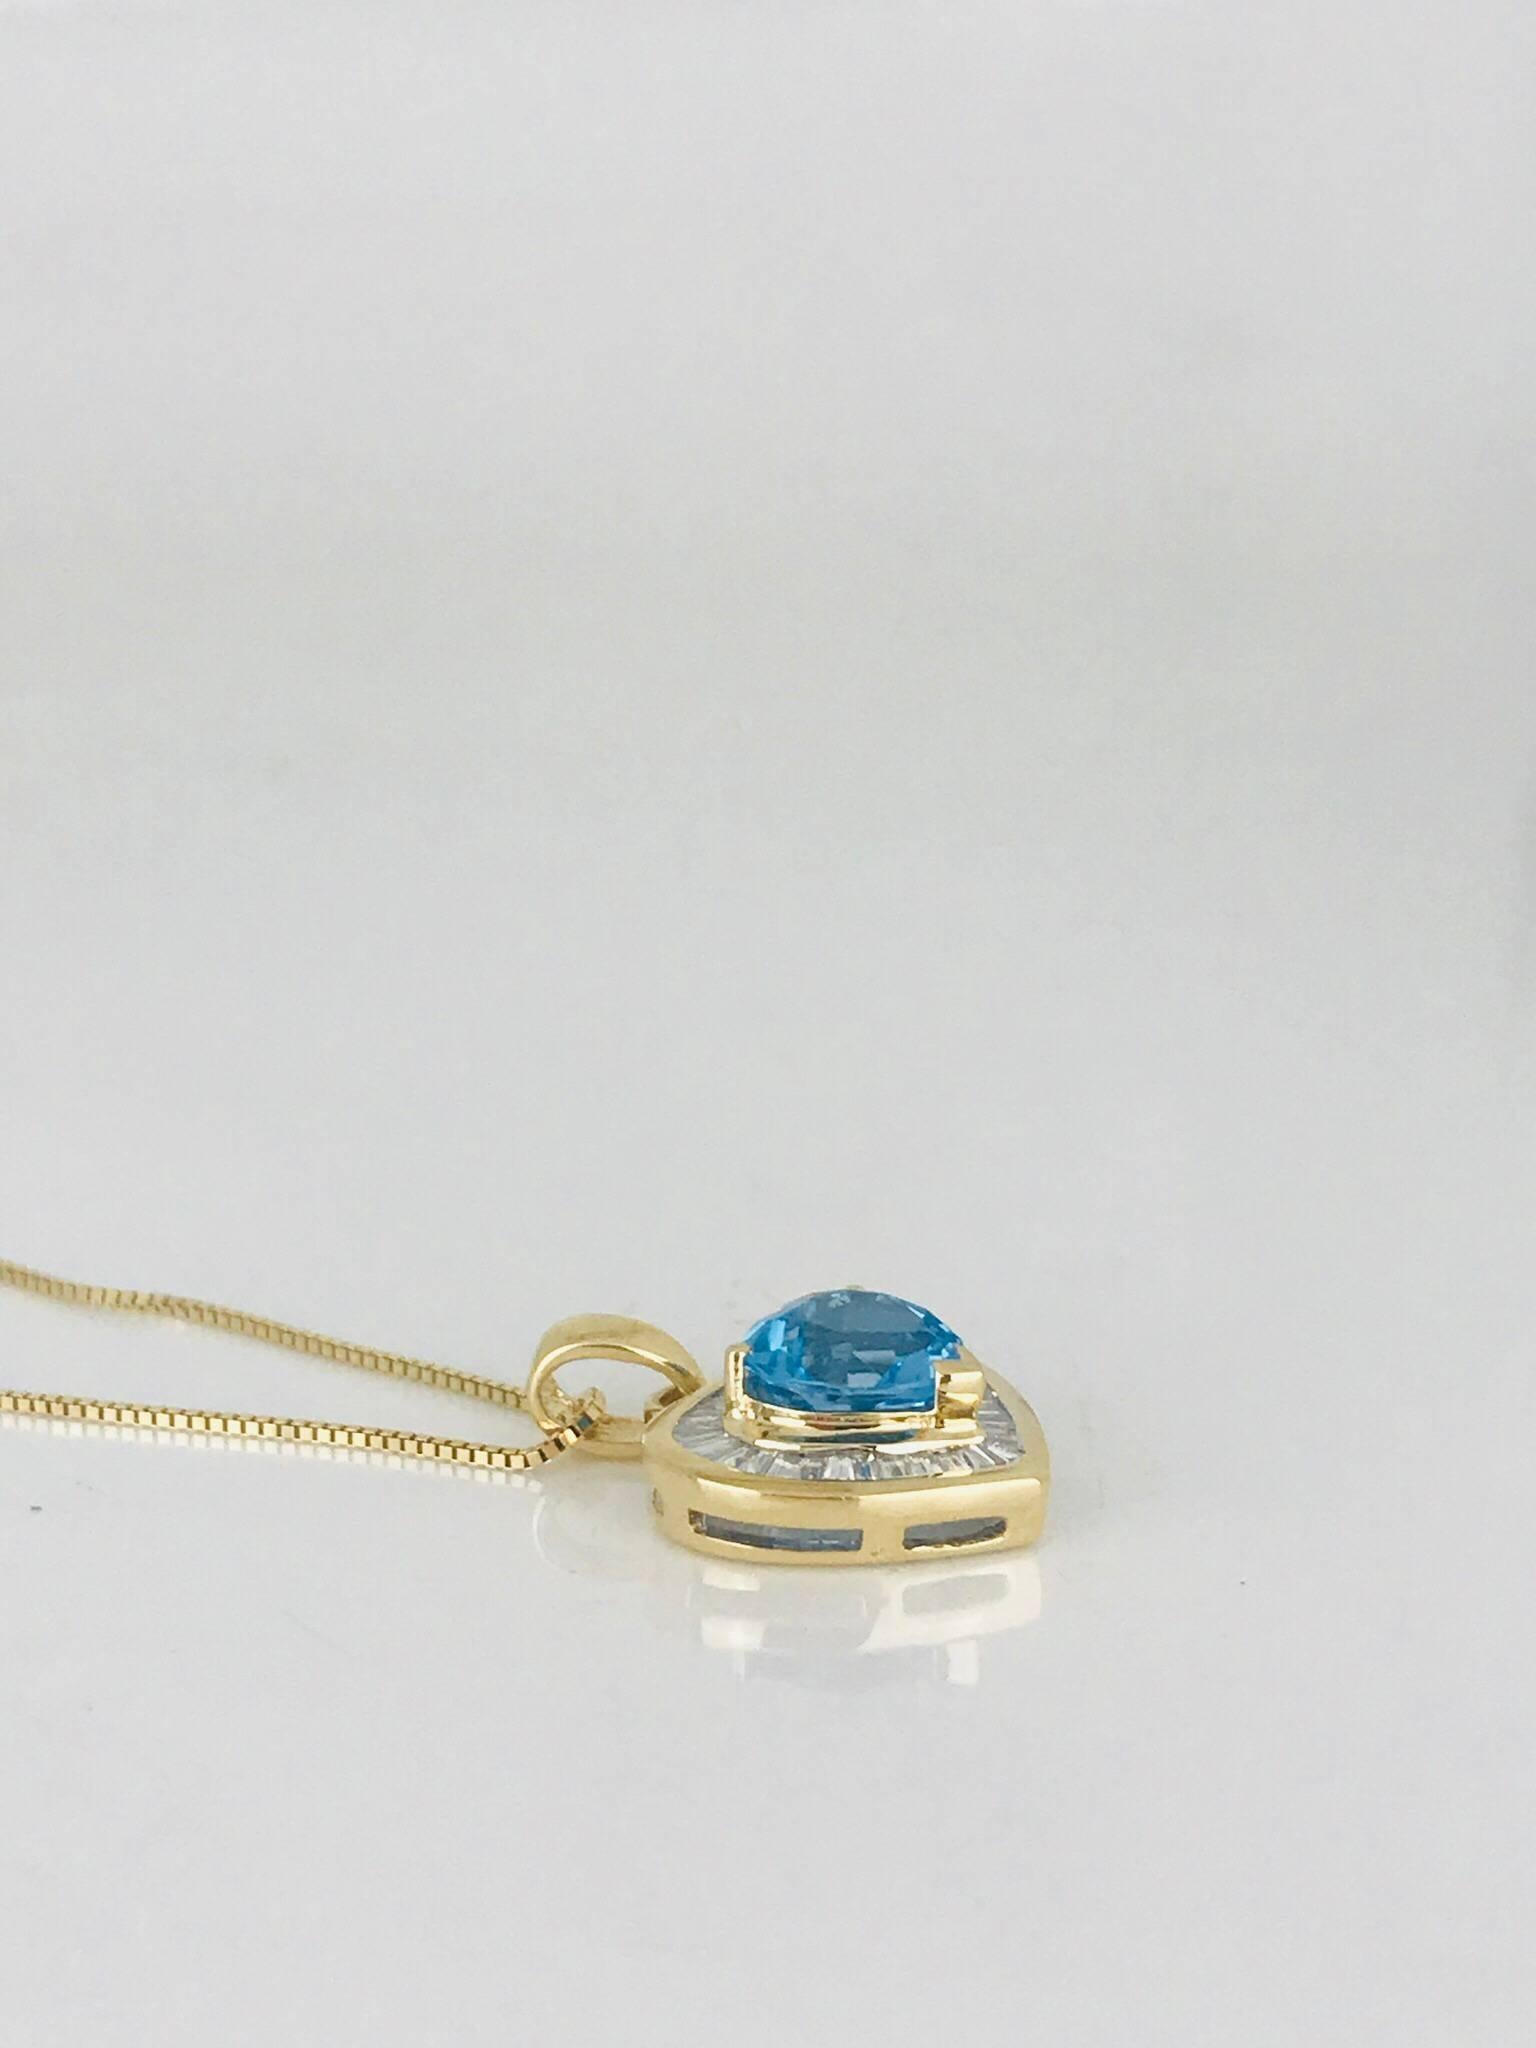 14 Karat yellow gold, Ballerina Baguette Diamond Heart. The diamonds are set surrounding a heart shaped, Swiss colored blue topaz. 
The (40) diamonds are channel set and measure approximately 1.85 mm x .80 mm in diameter.  
The total diamond weight